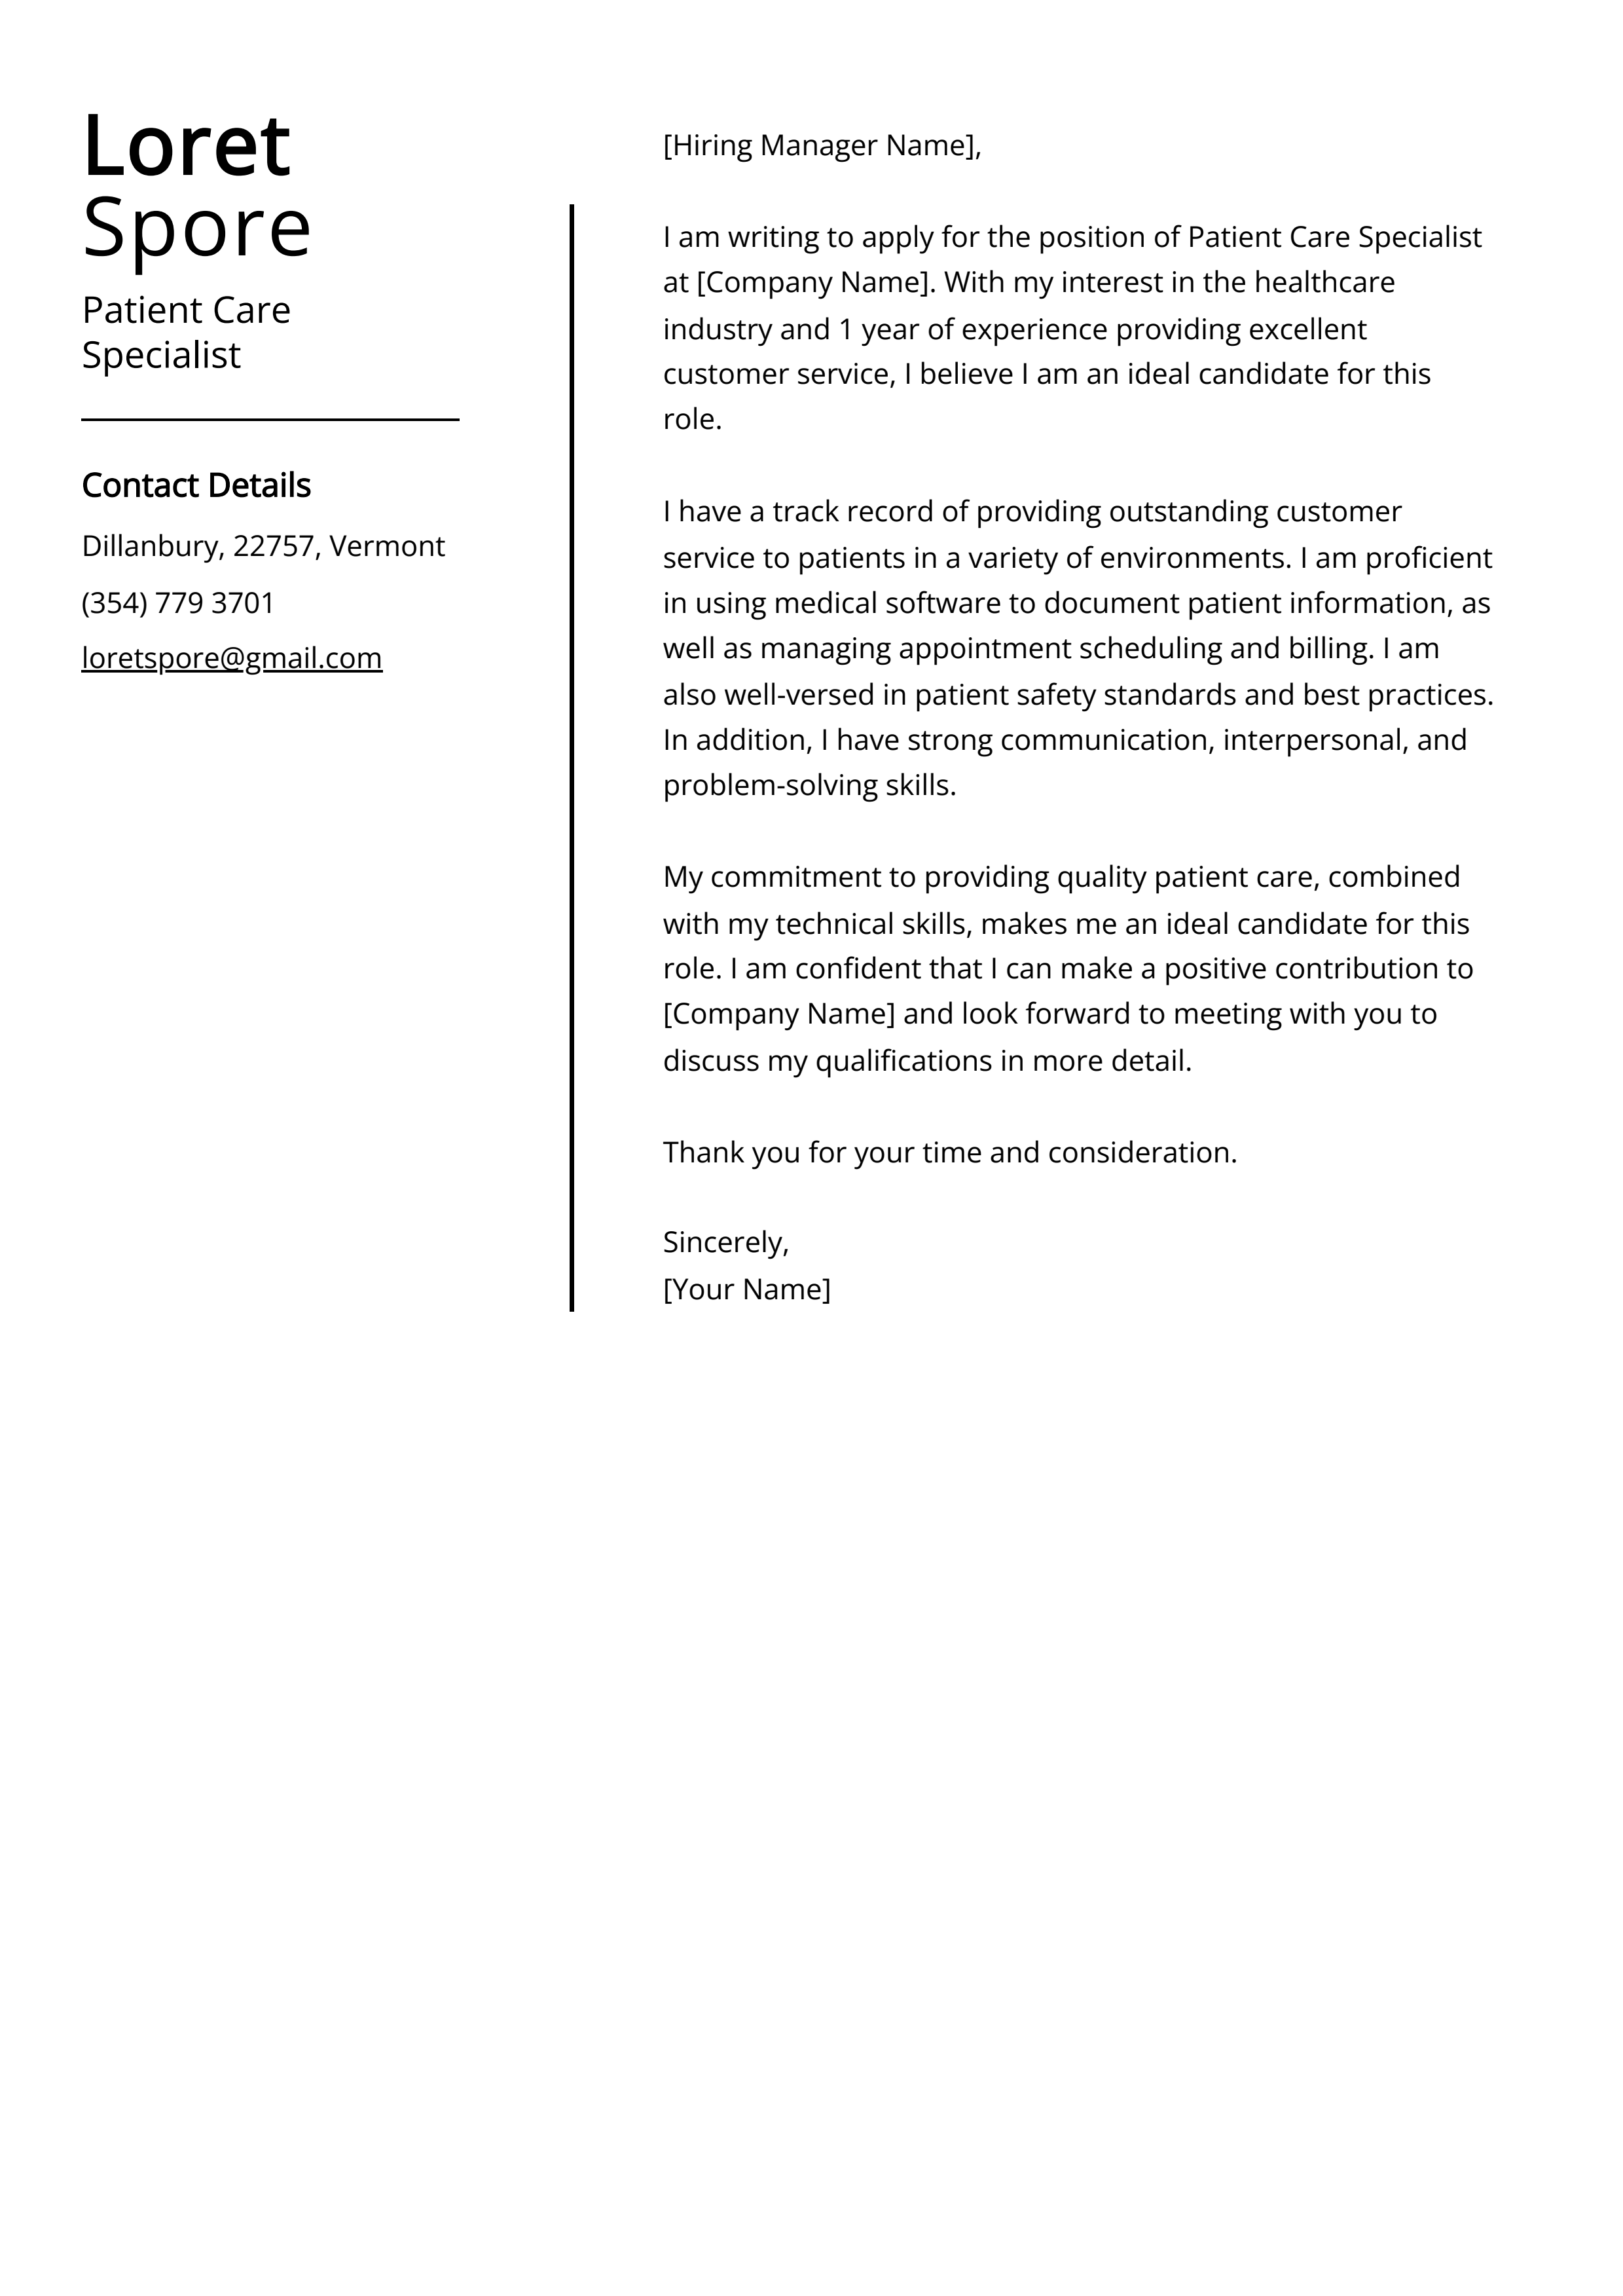 Patient Care Specialist Cover Letter Example